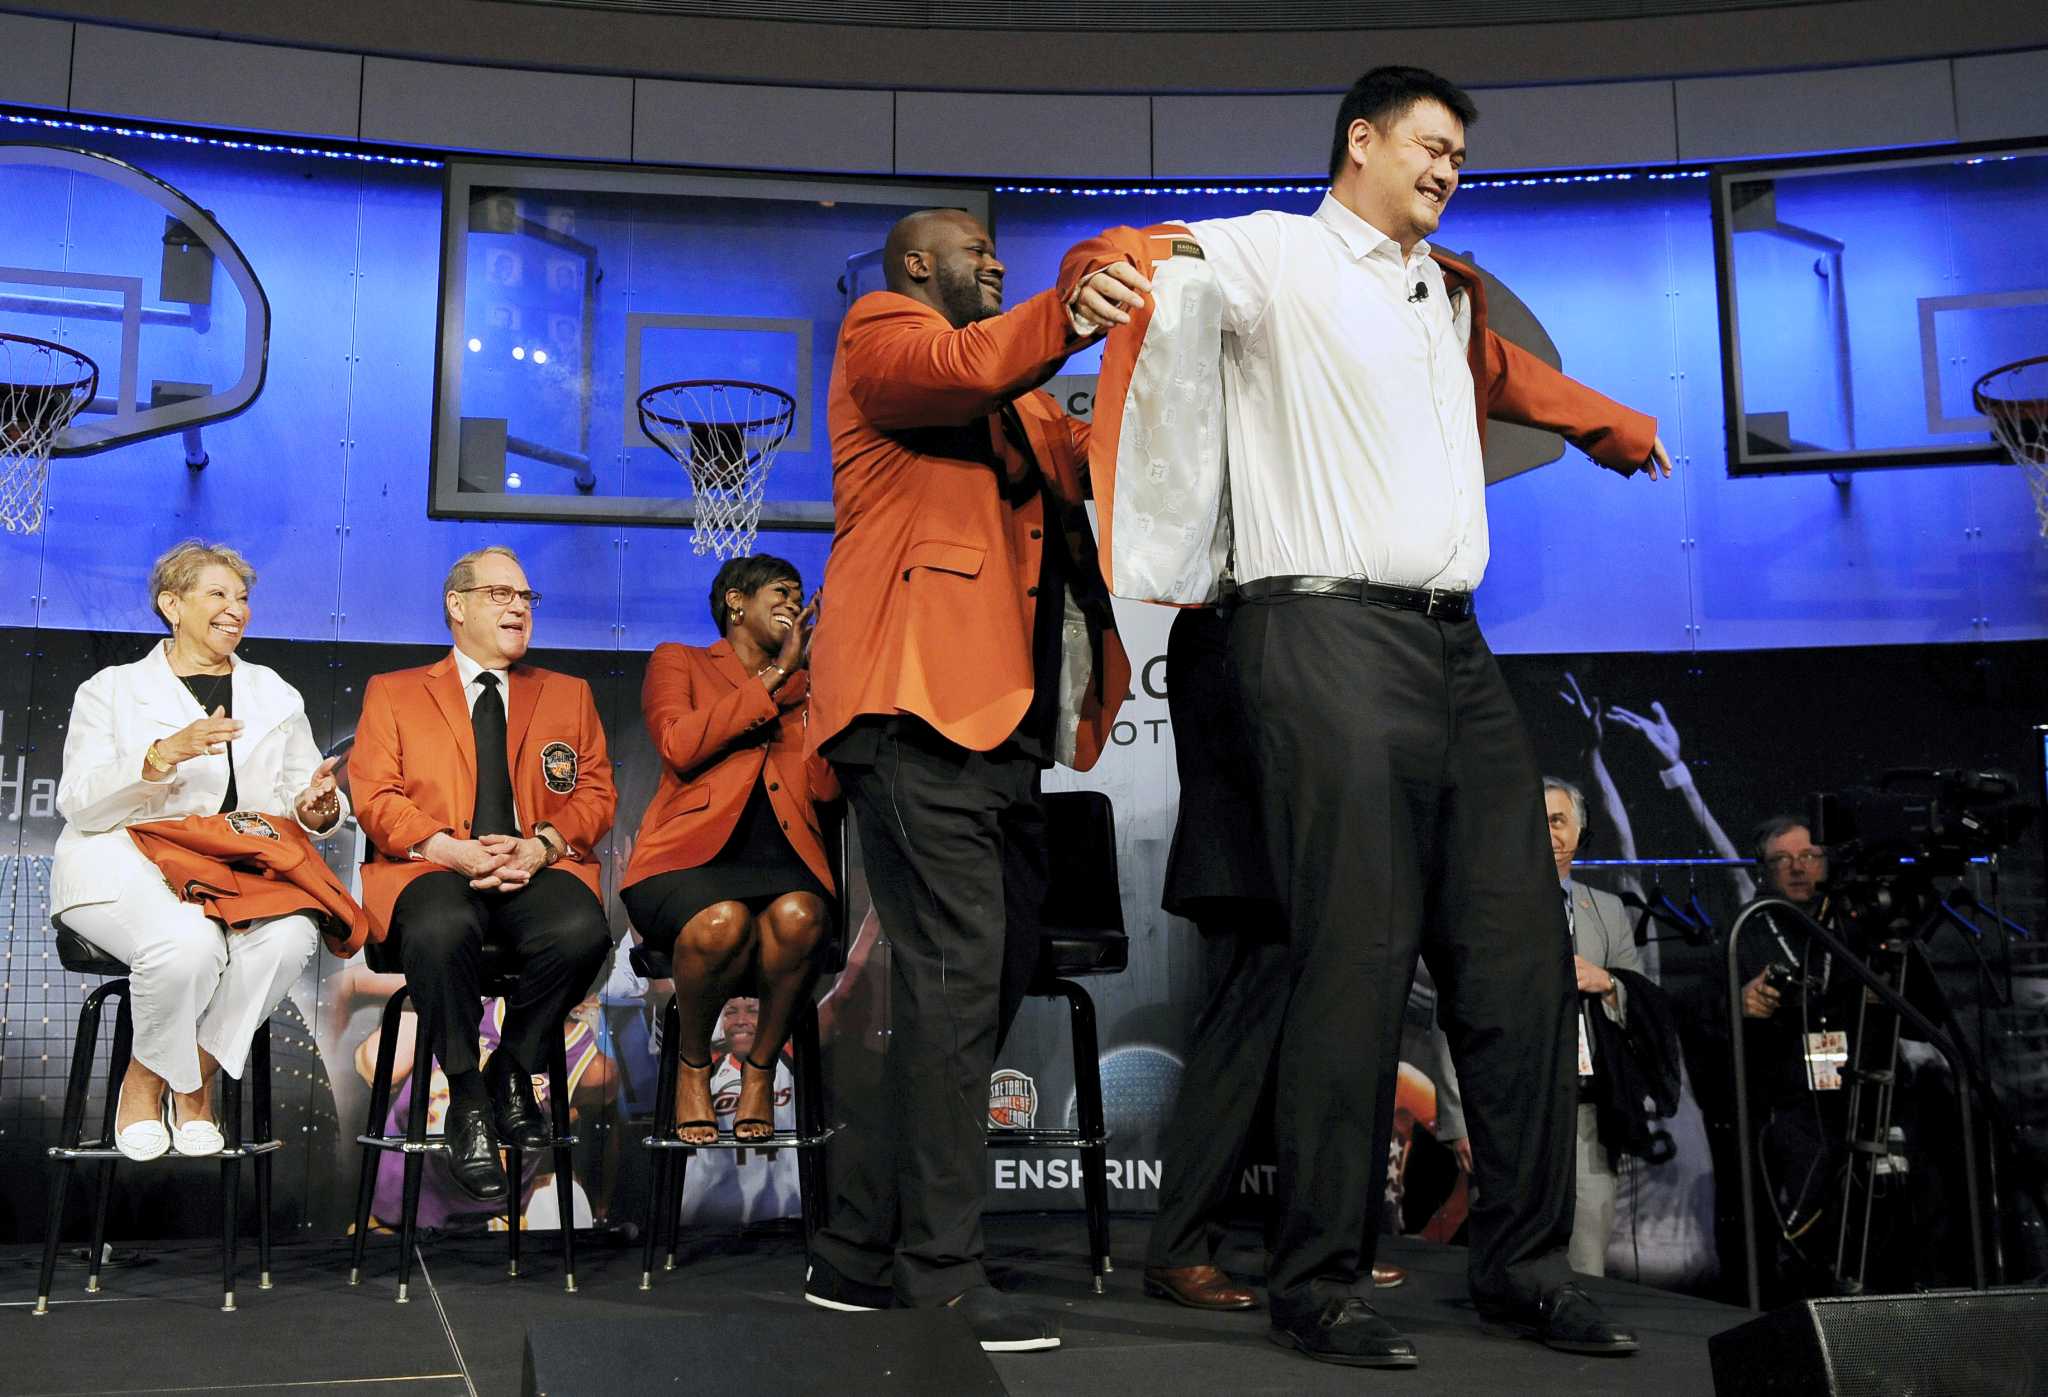 yao ming and shaquille oneal